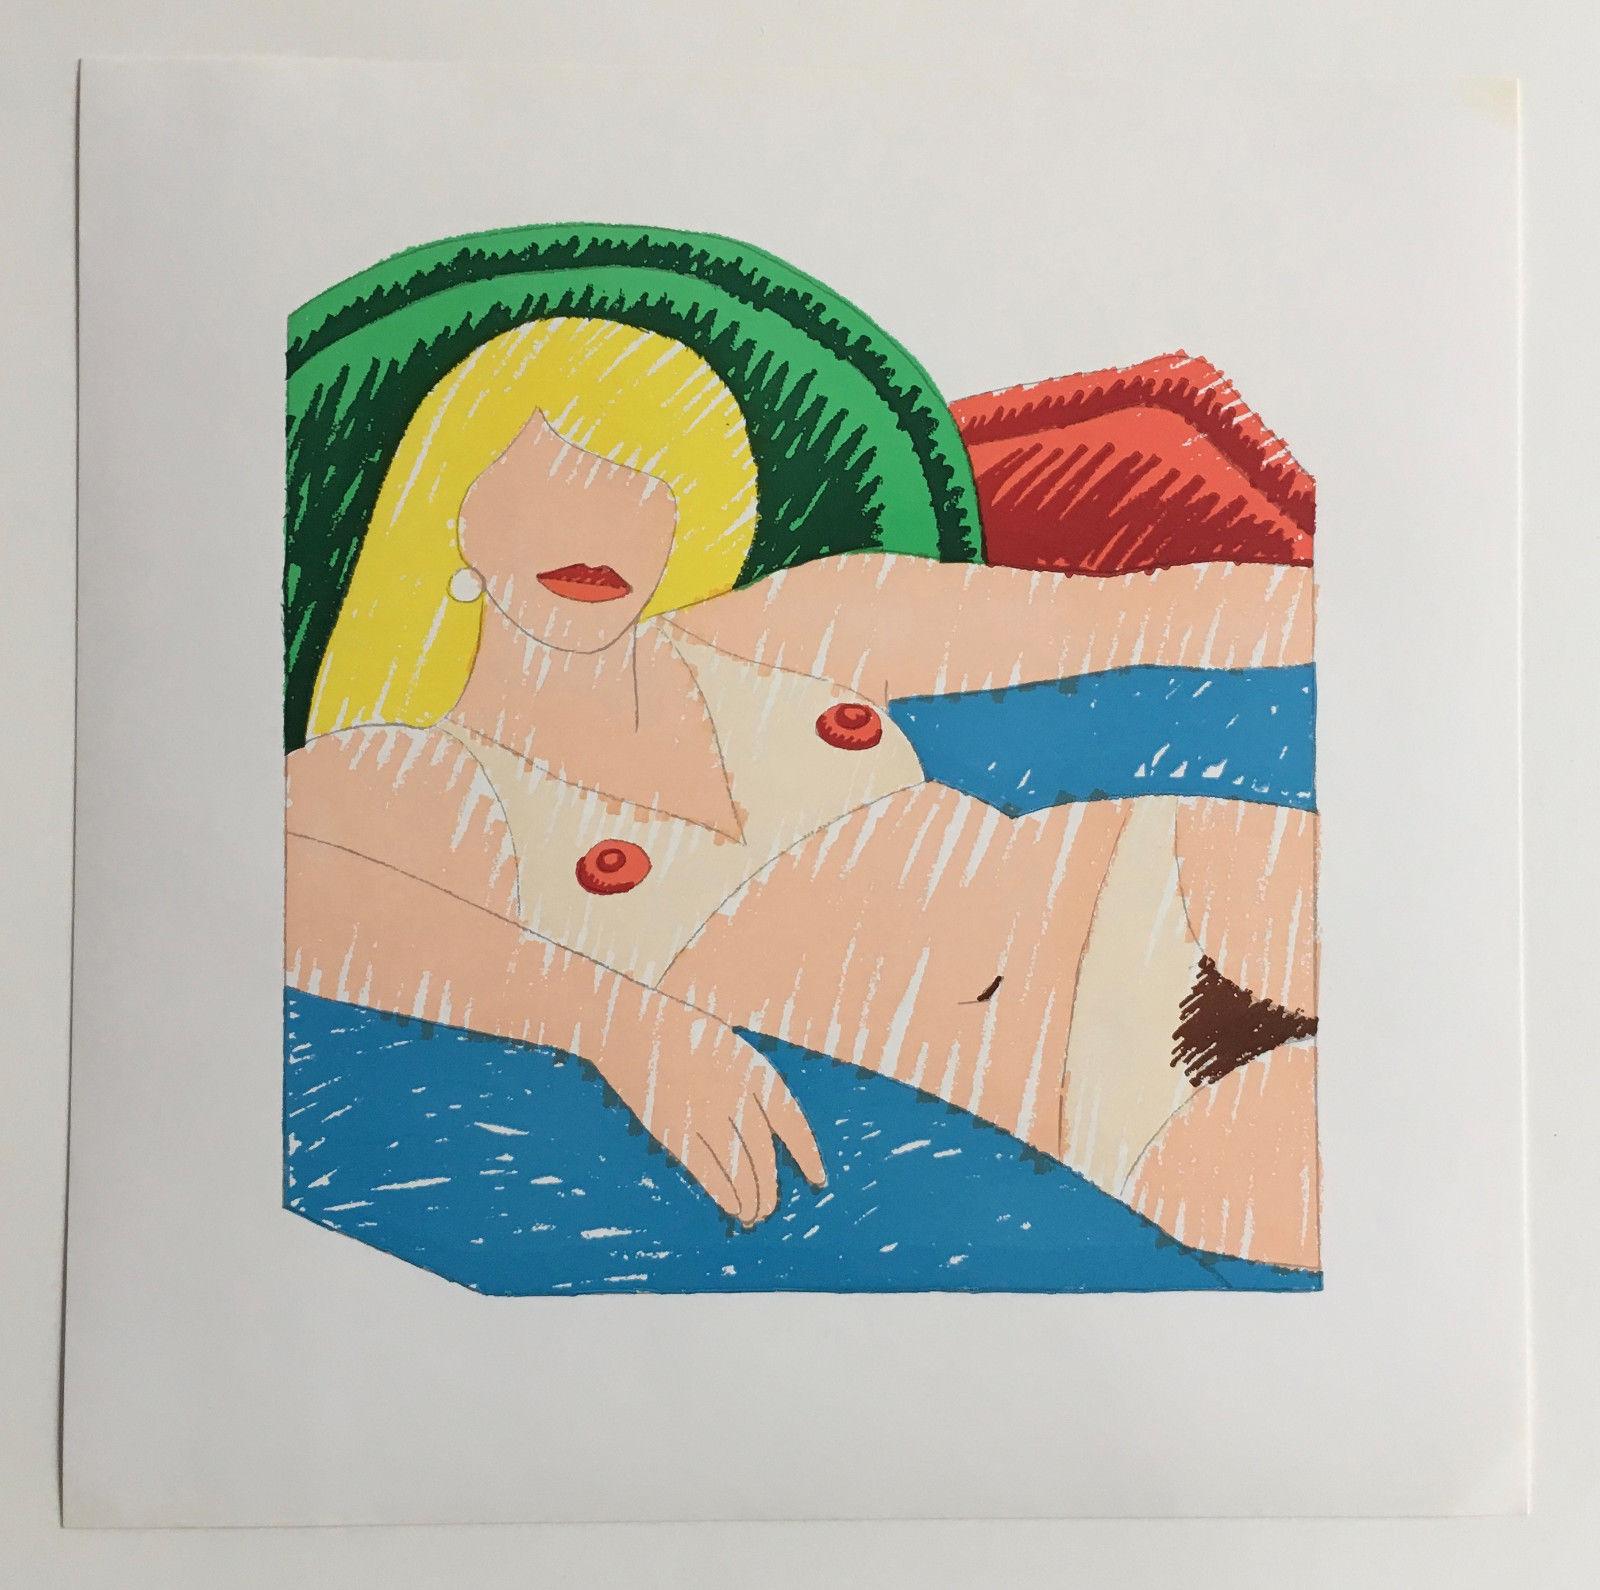 In 1976 Parasol Press, a leading New York City print studio, collaborated with the then Curator of Prints at MoMA to put together a portfolio of small but affordable and impactful prints. An impressive group of 13 artists participated in the